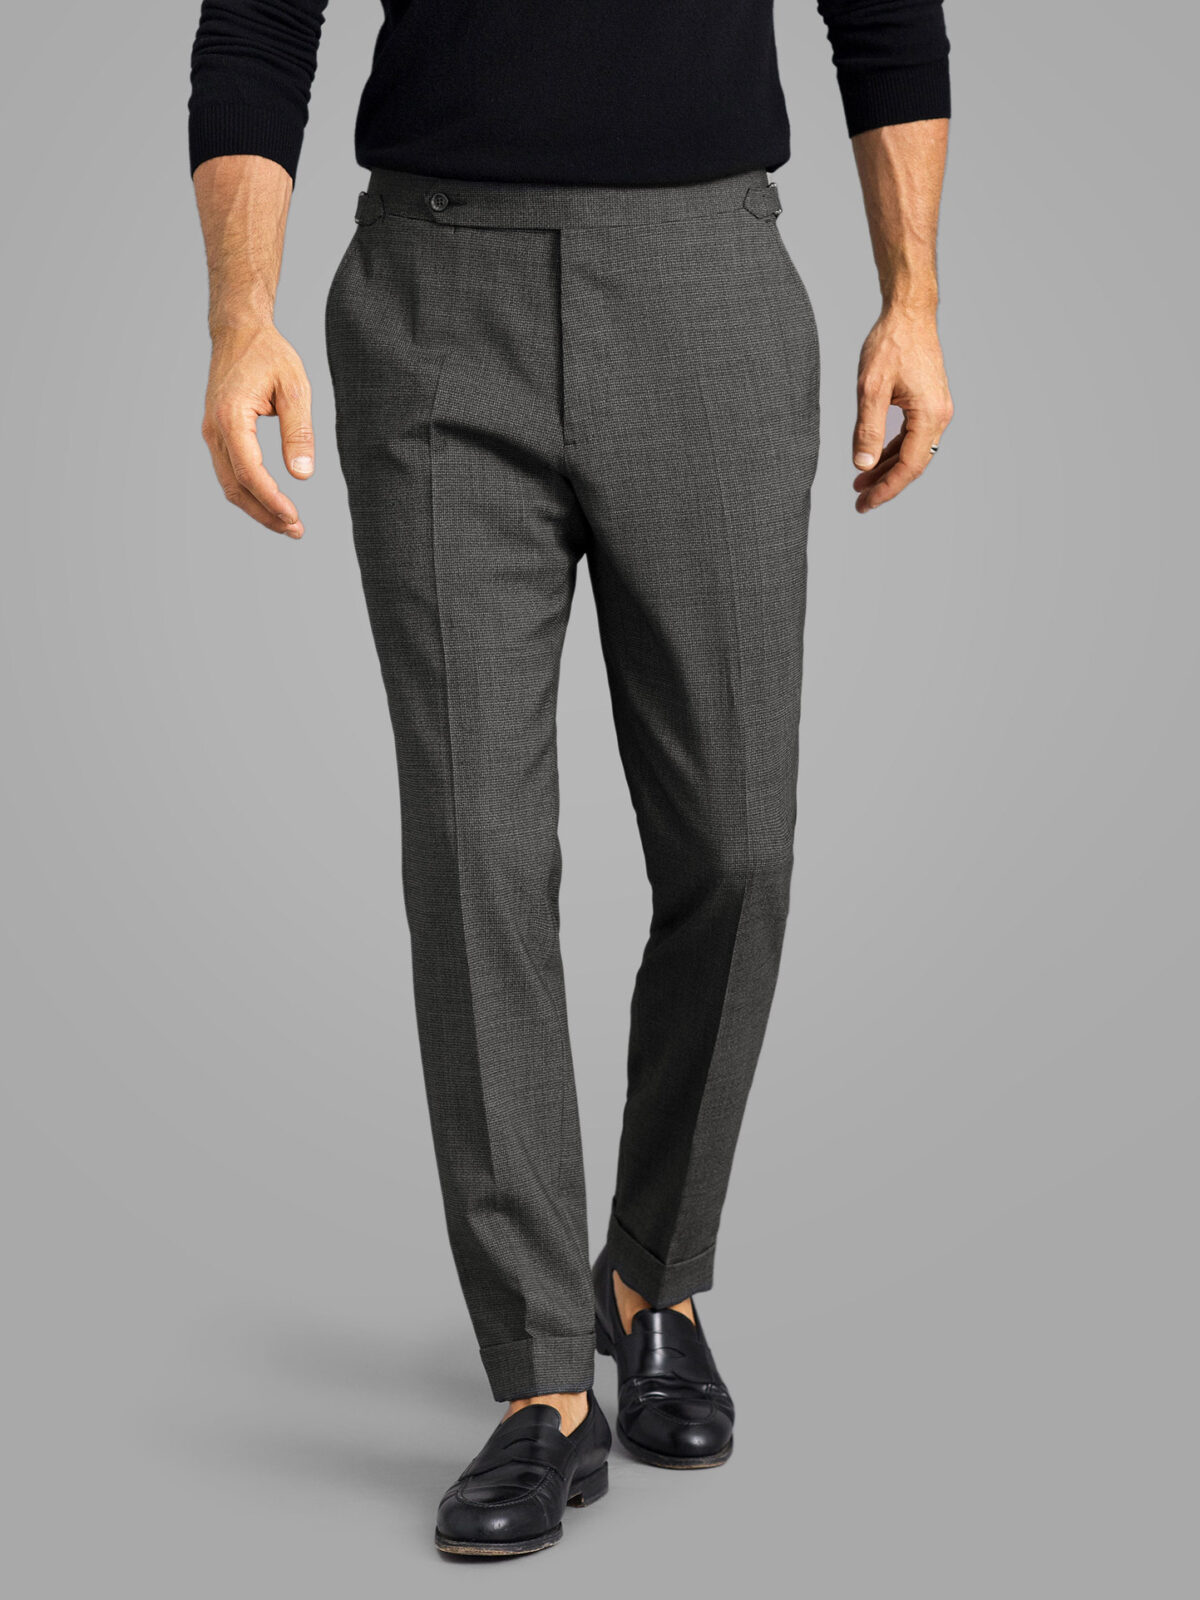 Custom Trouser Design - Business, Casual and Formal - Proper Cloth